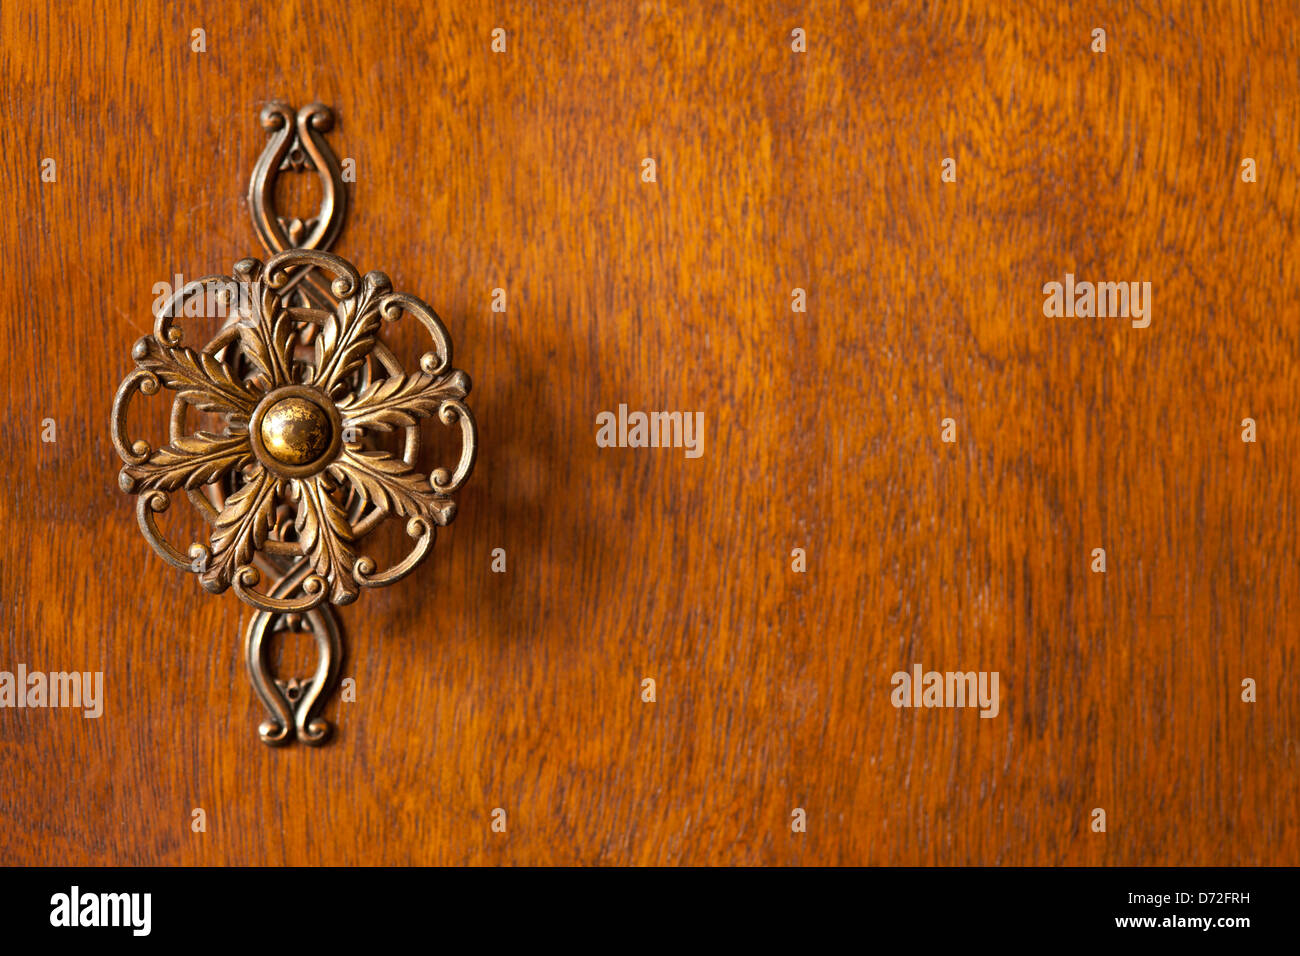 detail of wardrobe door or wooden brown background with decorative knob on left side Stock Photo